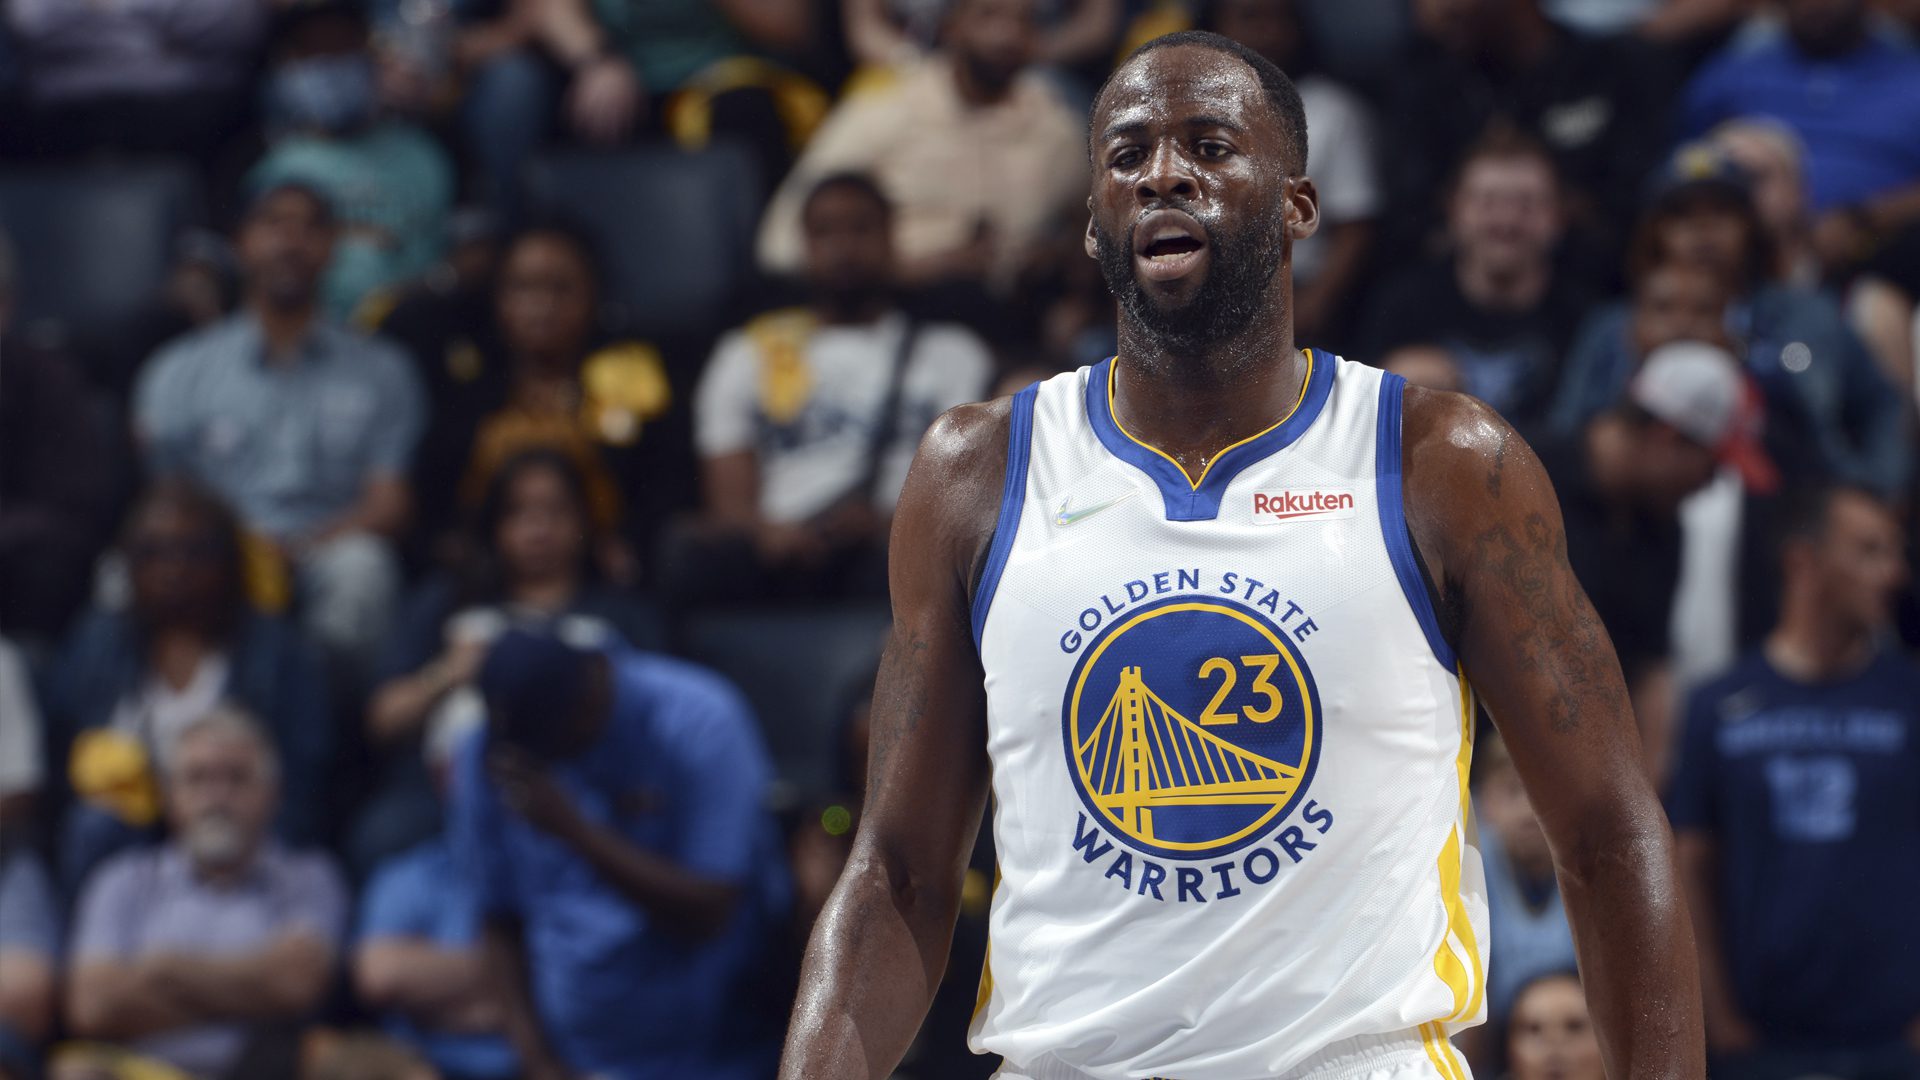 Draymond Green: ‘I Will Do What I Have To Do To Make That Right’